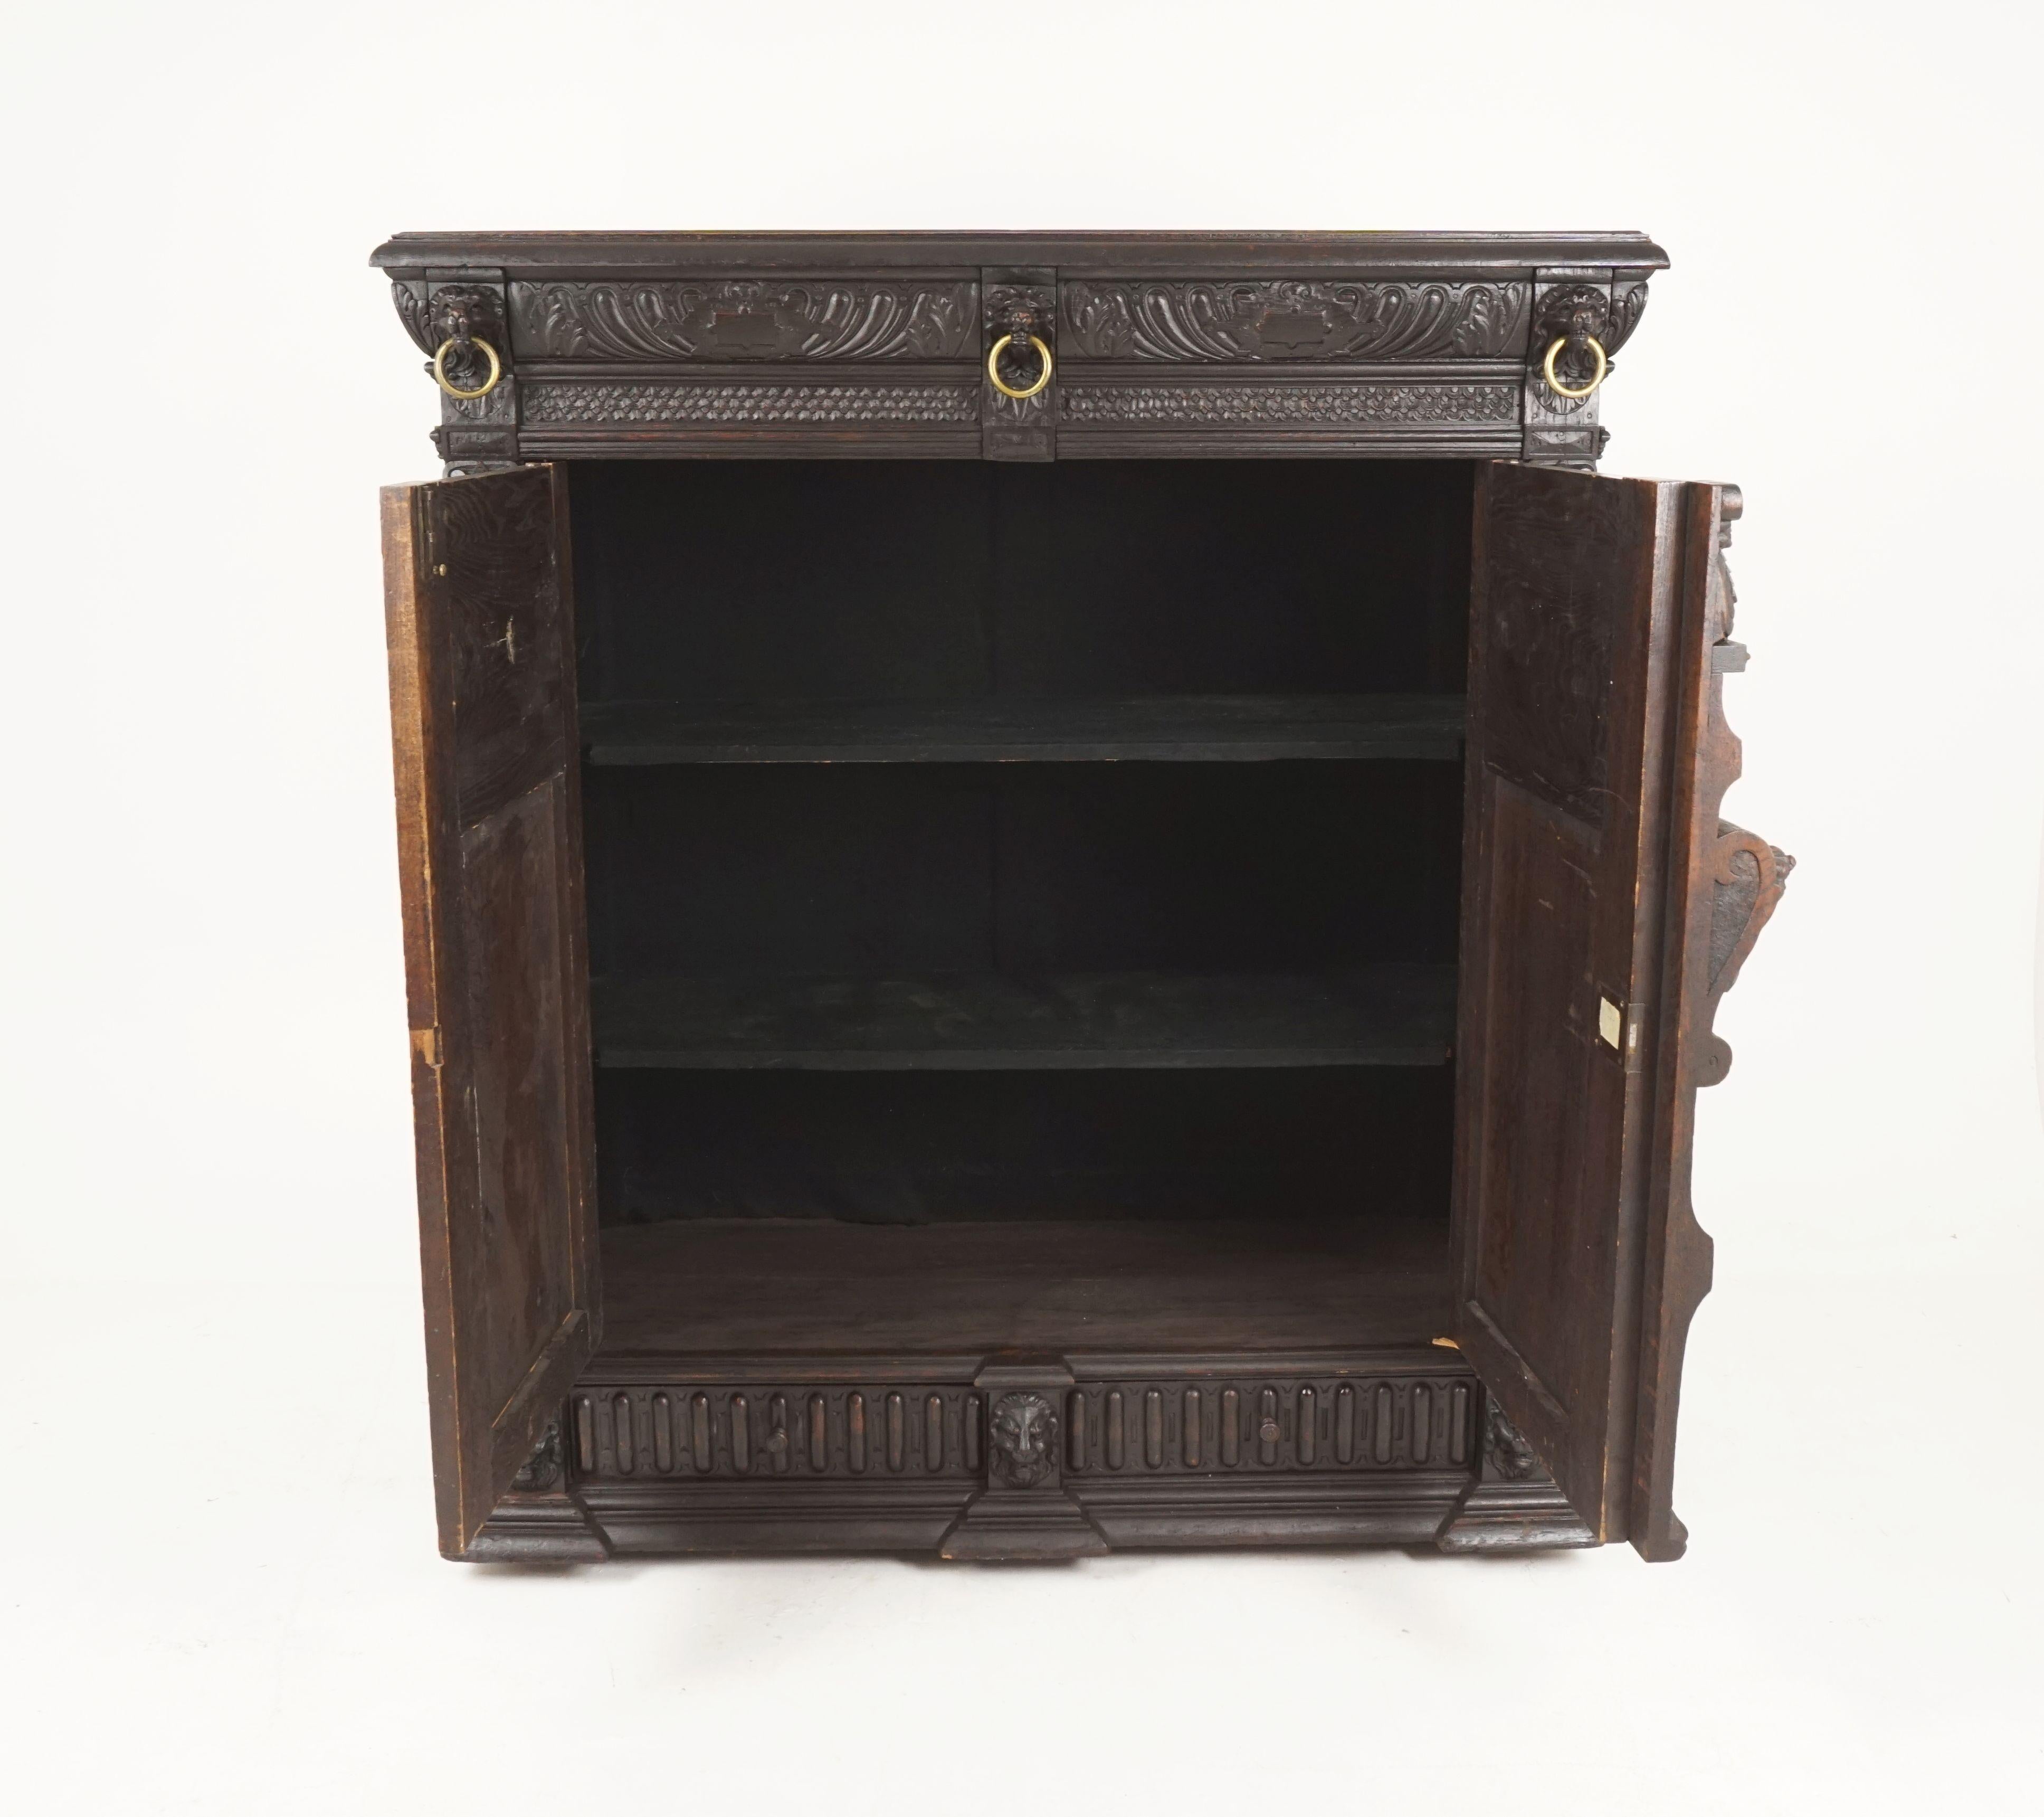 Antique French carved oak 19th century hall cabinet, side cabinet, France, 1880, H068

France, 1880
Solid oak
Original finish
Rectangular moulded top
Carved frieze
Three lion's heads with brass rings
Pair of heavily carved paneled doors
Opens to